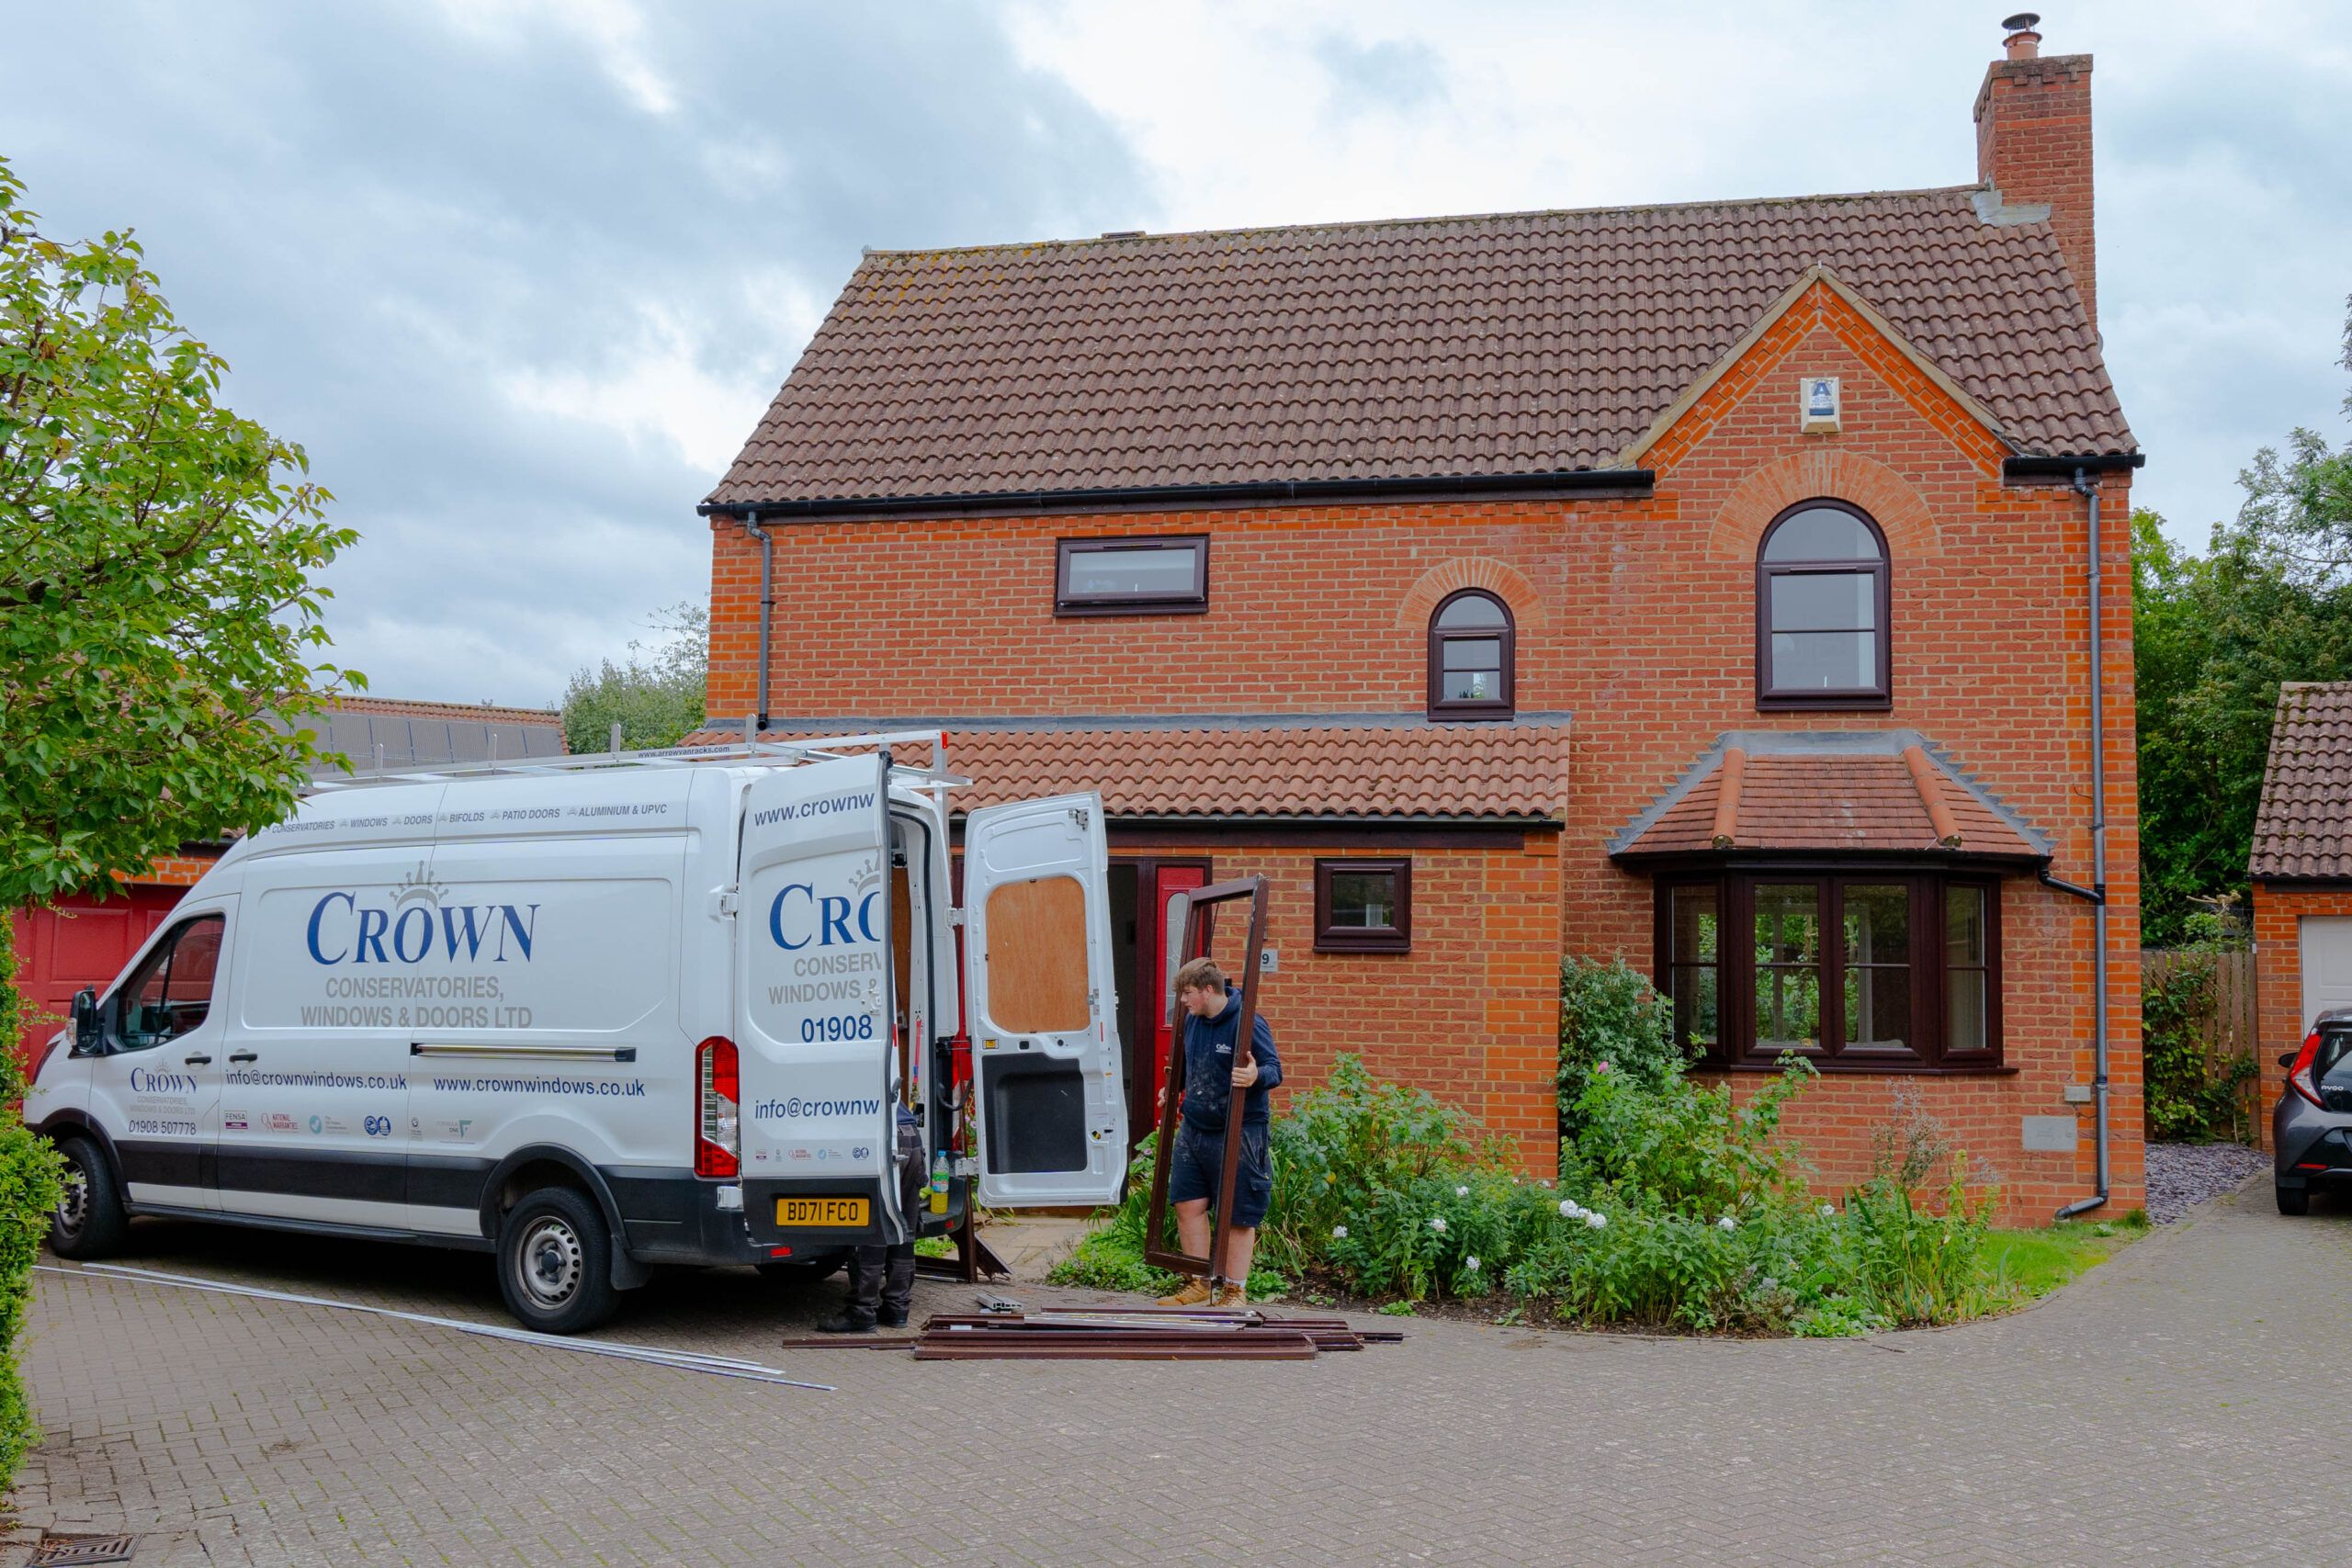 Crown Van Outside Property Scaled